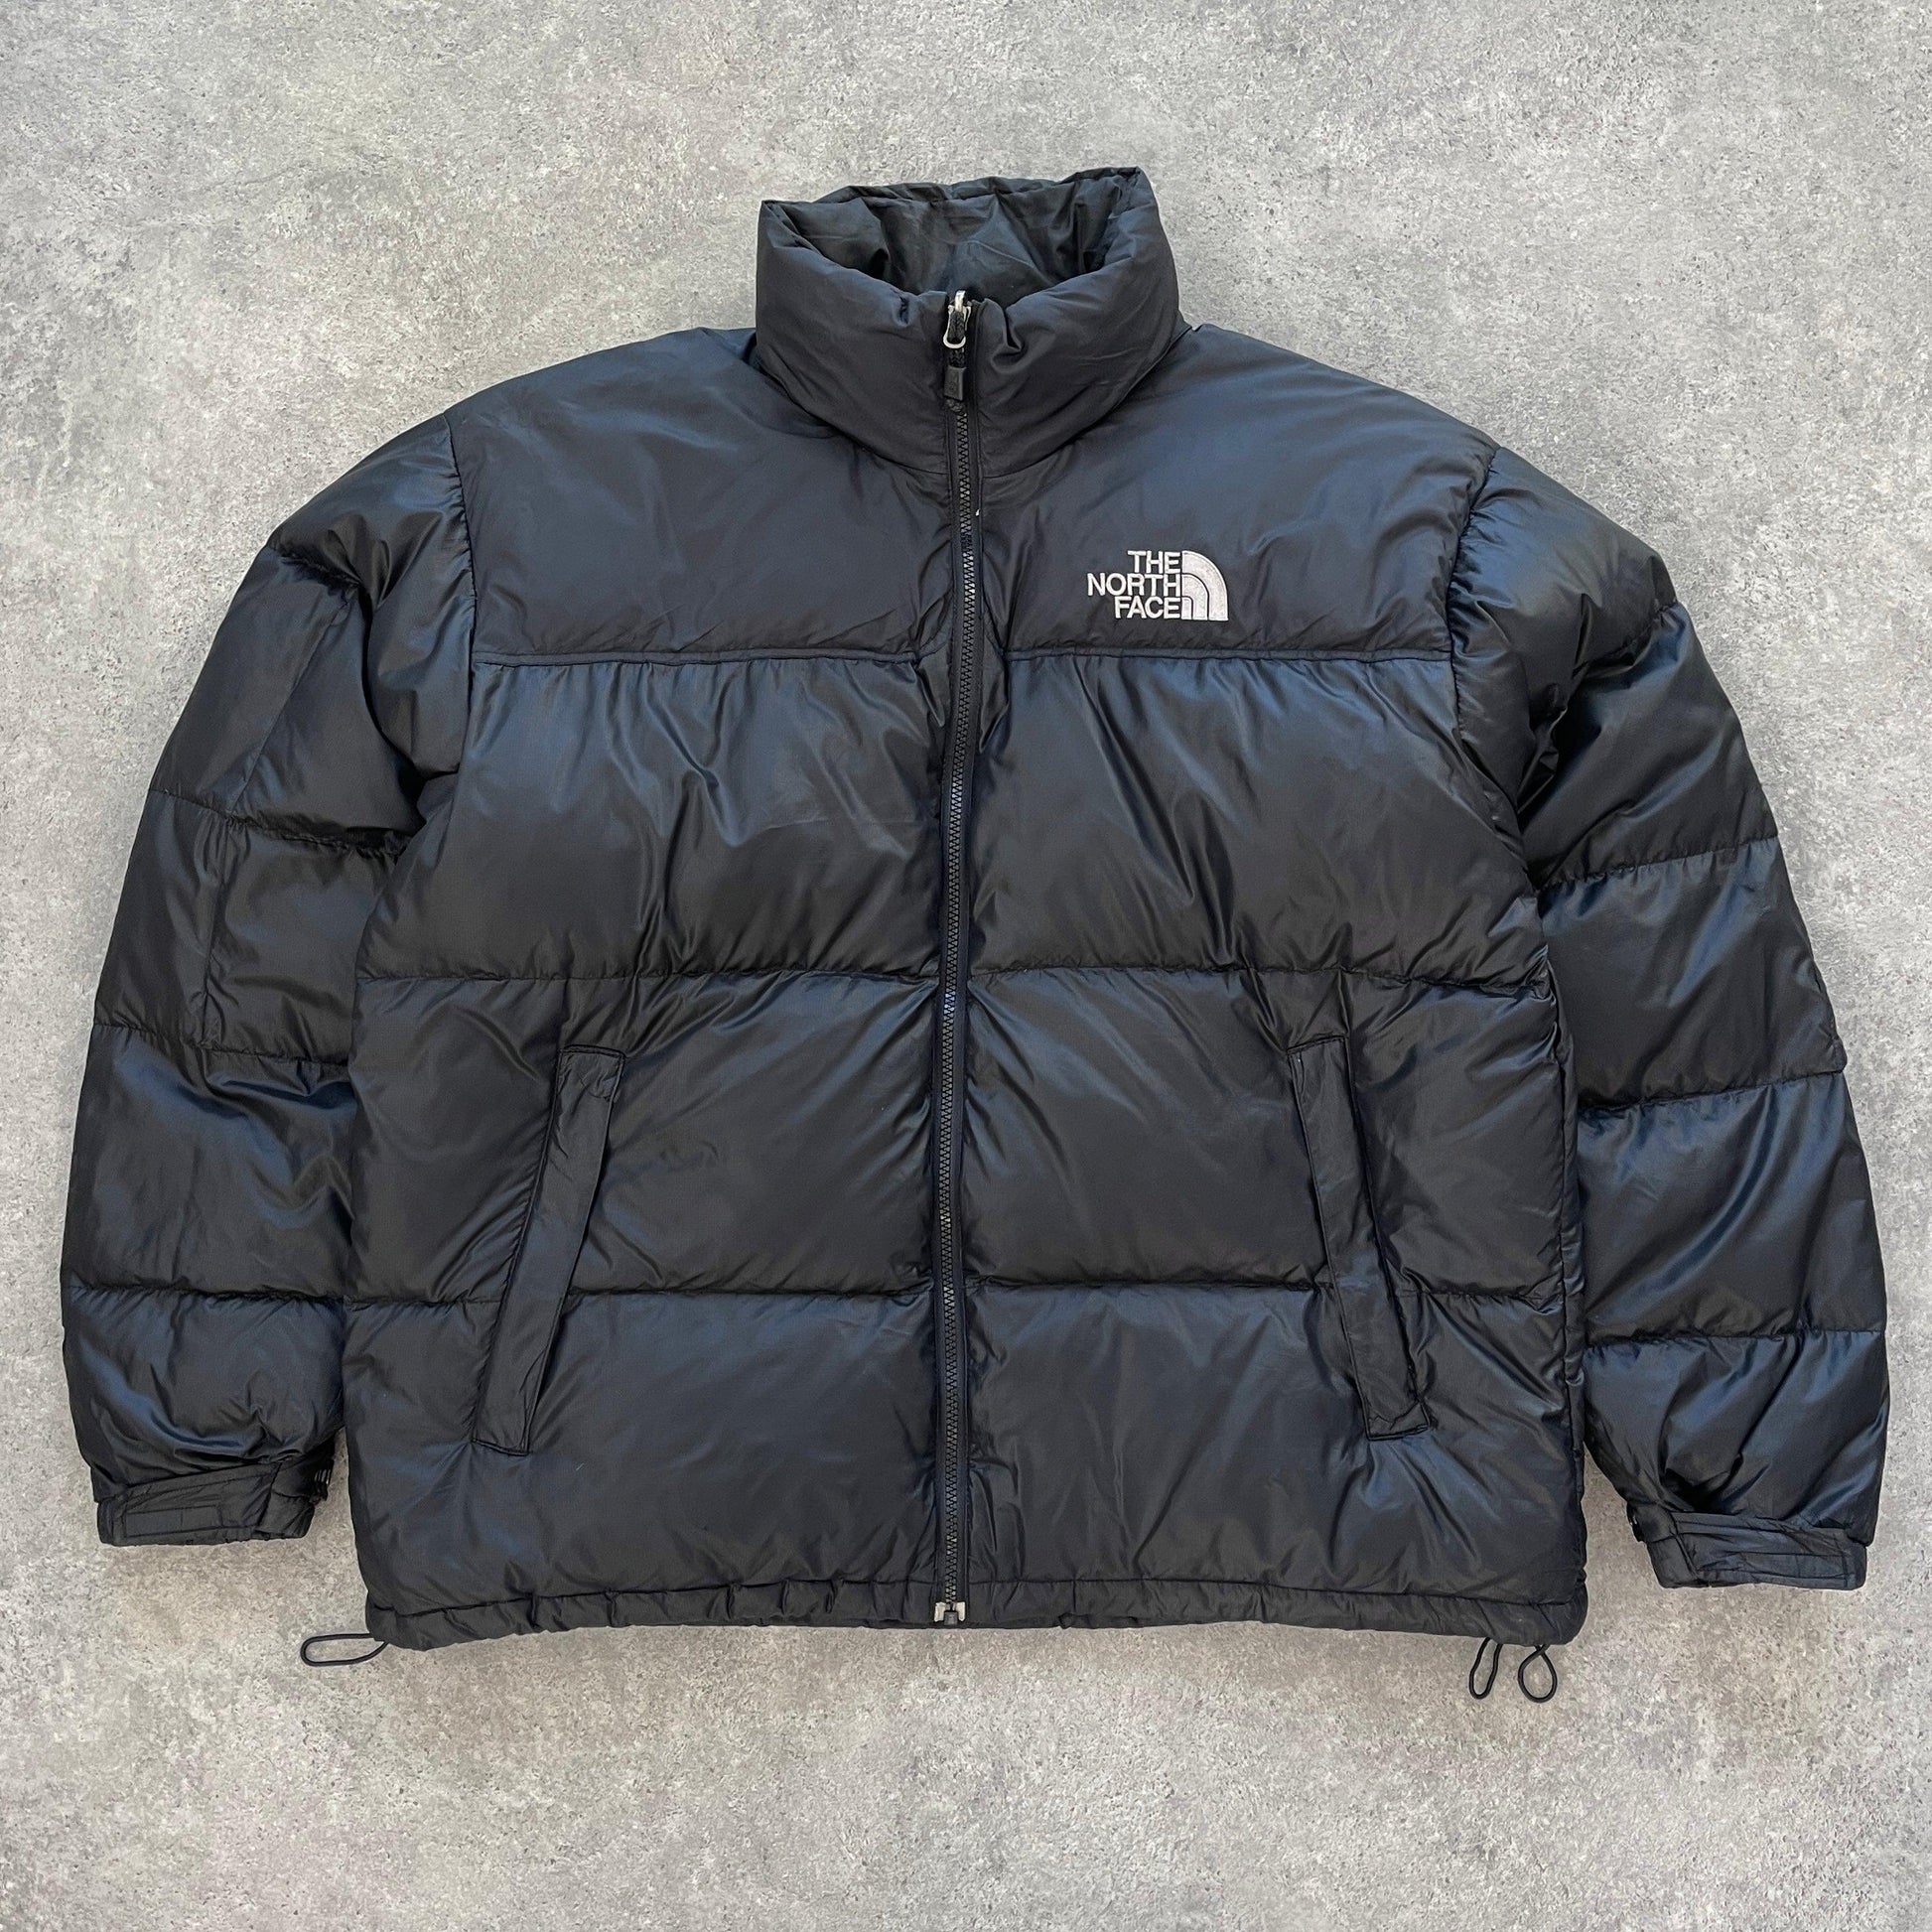 The North Face Nuptse 700 down fill puffer jacket (XL) - Known Source